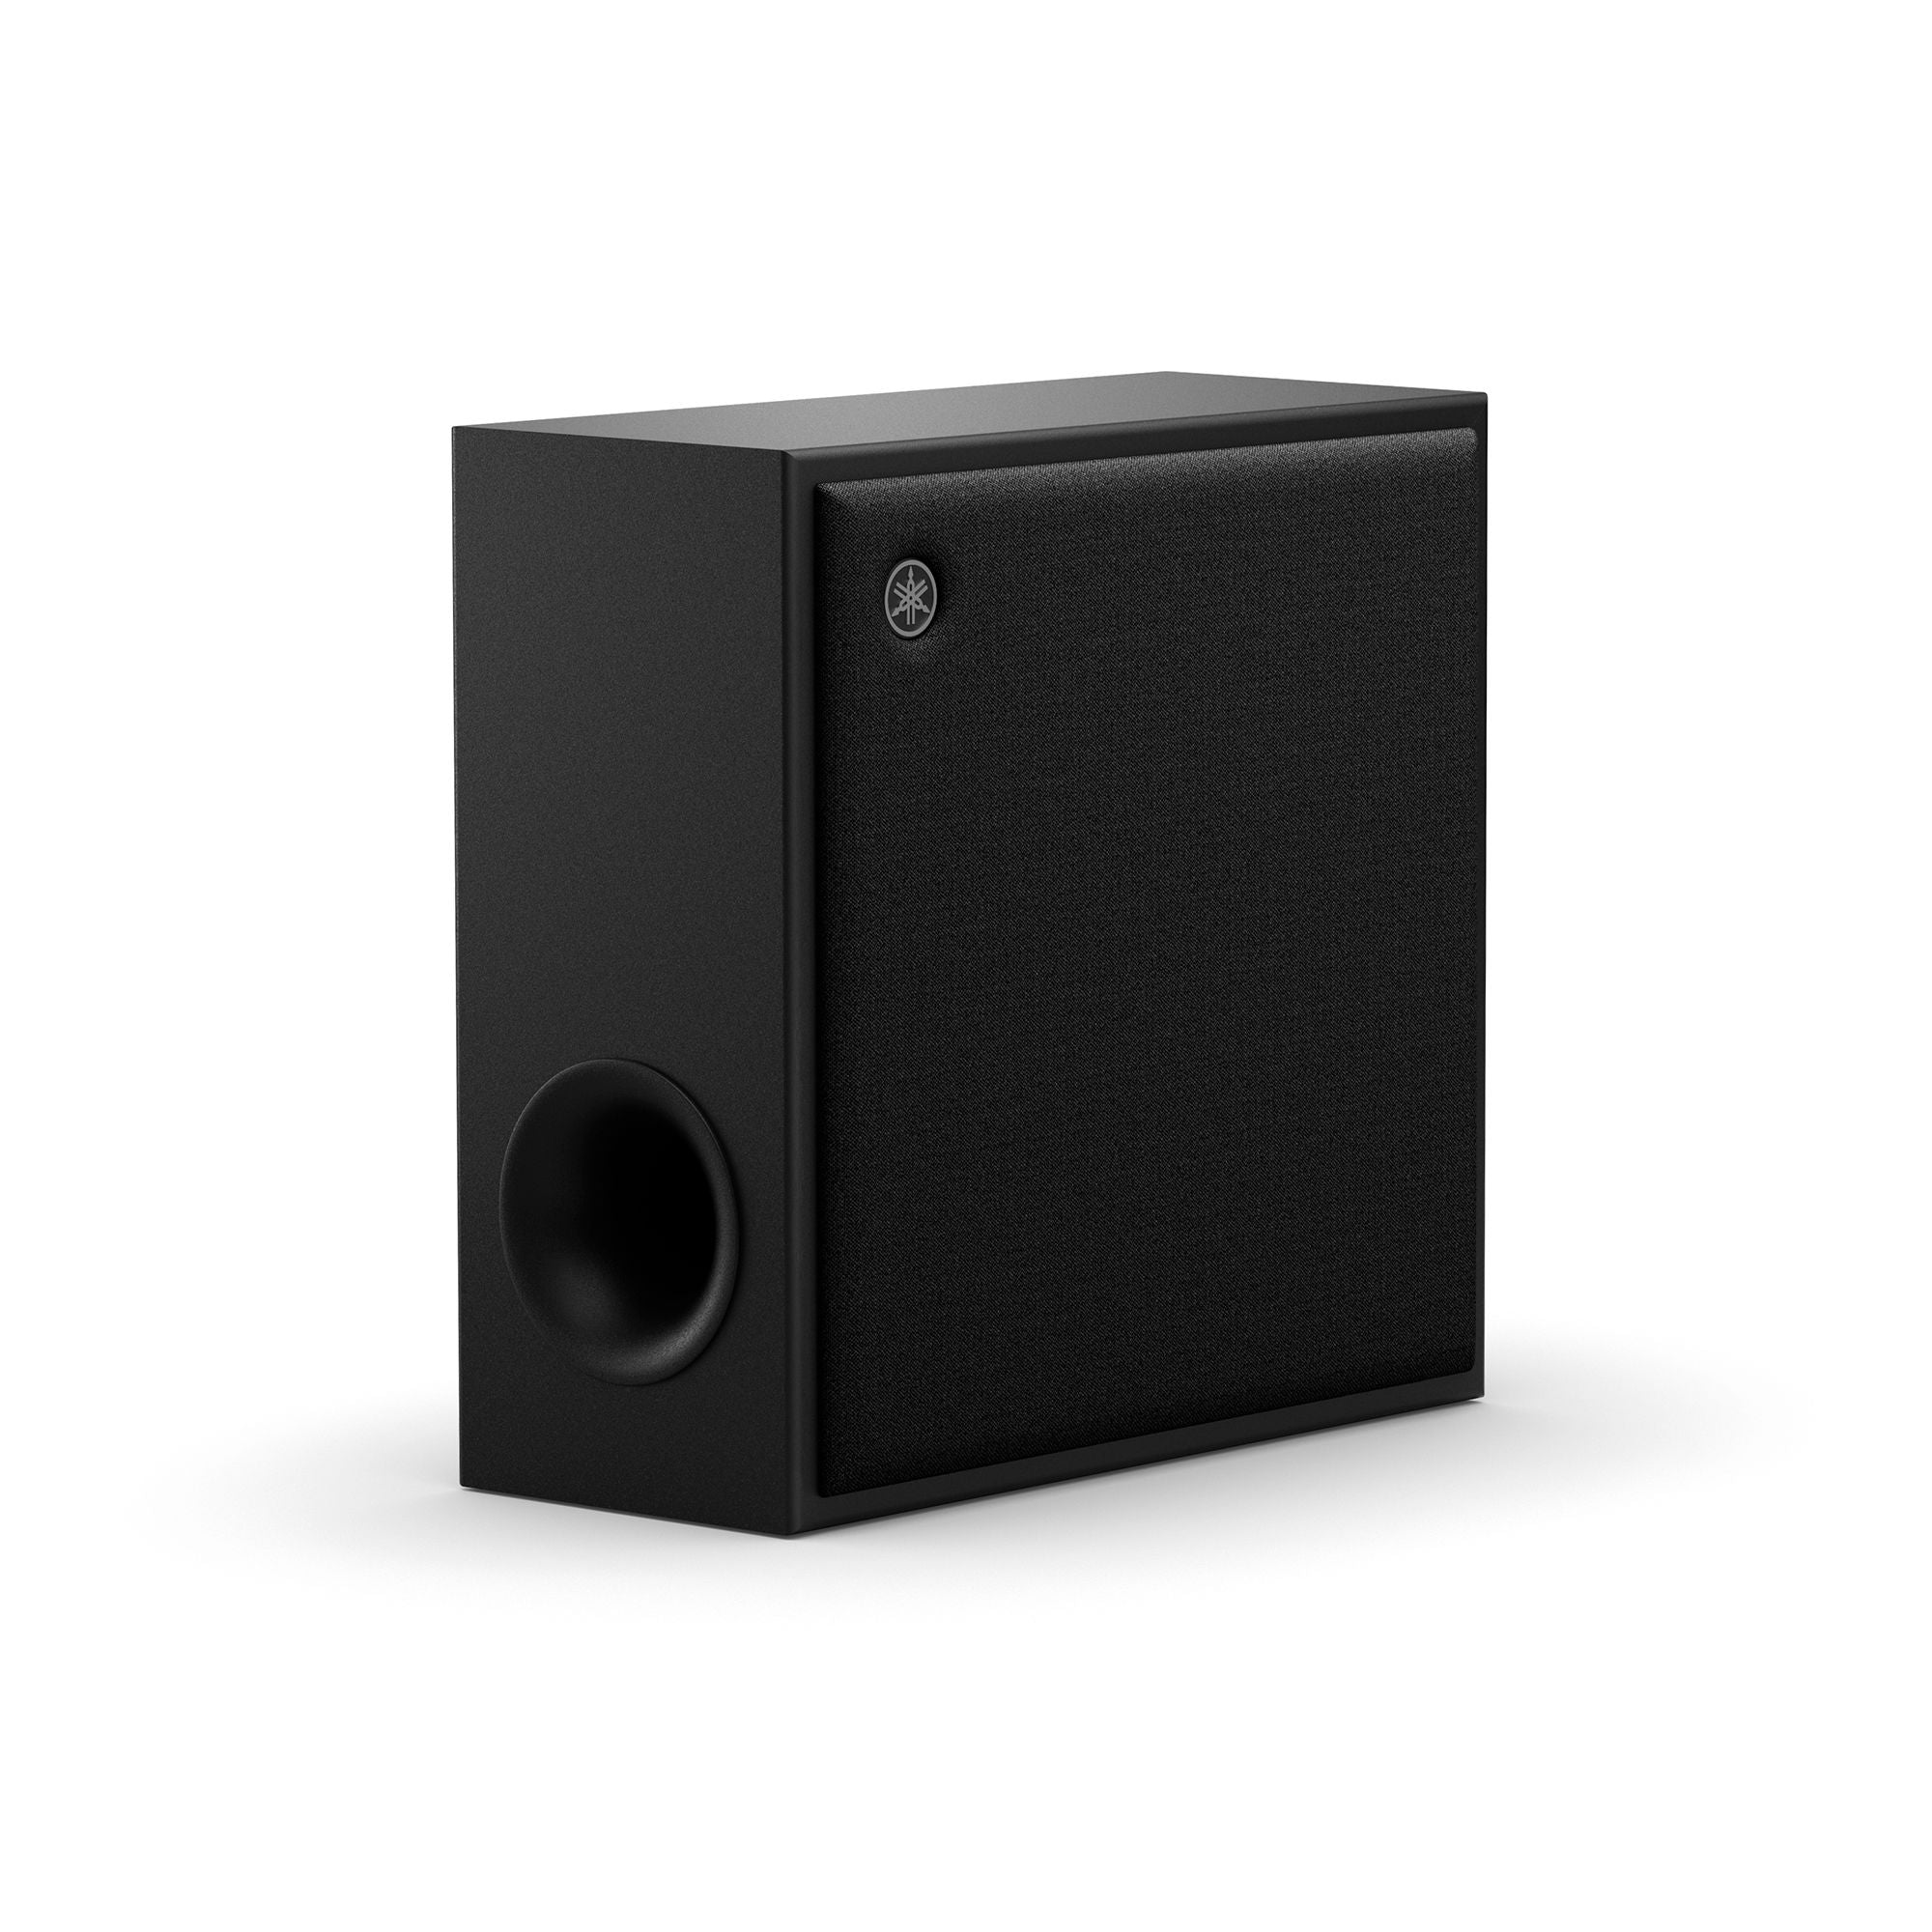 TRUE X SUB 100A (SW-X100A) Subwoofer New 全新上市